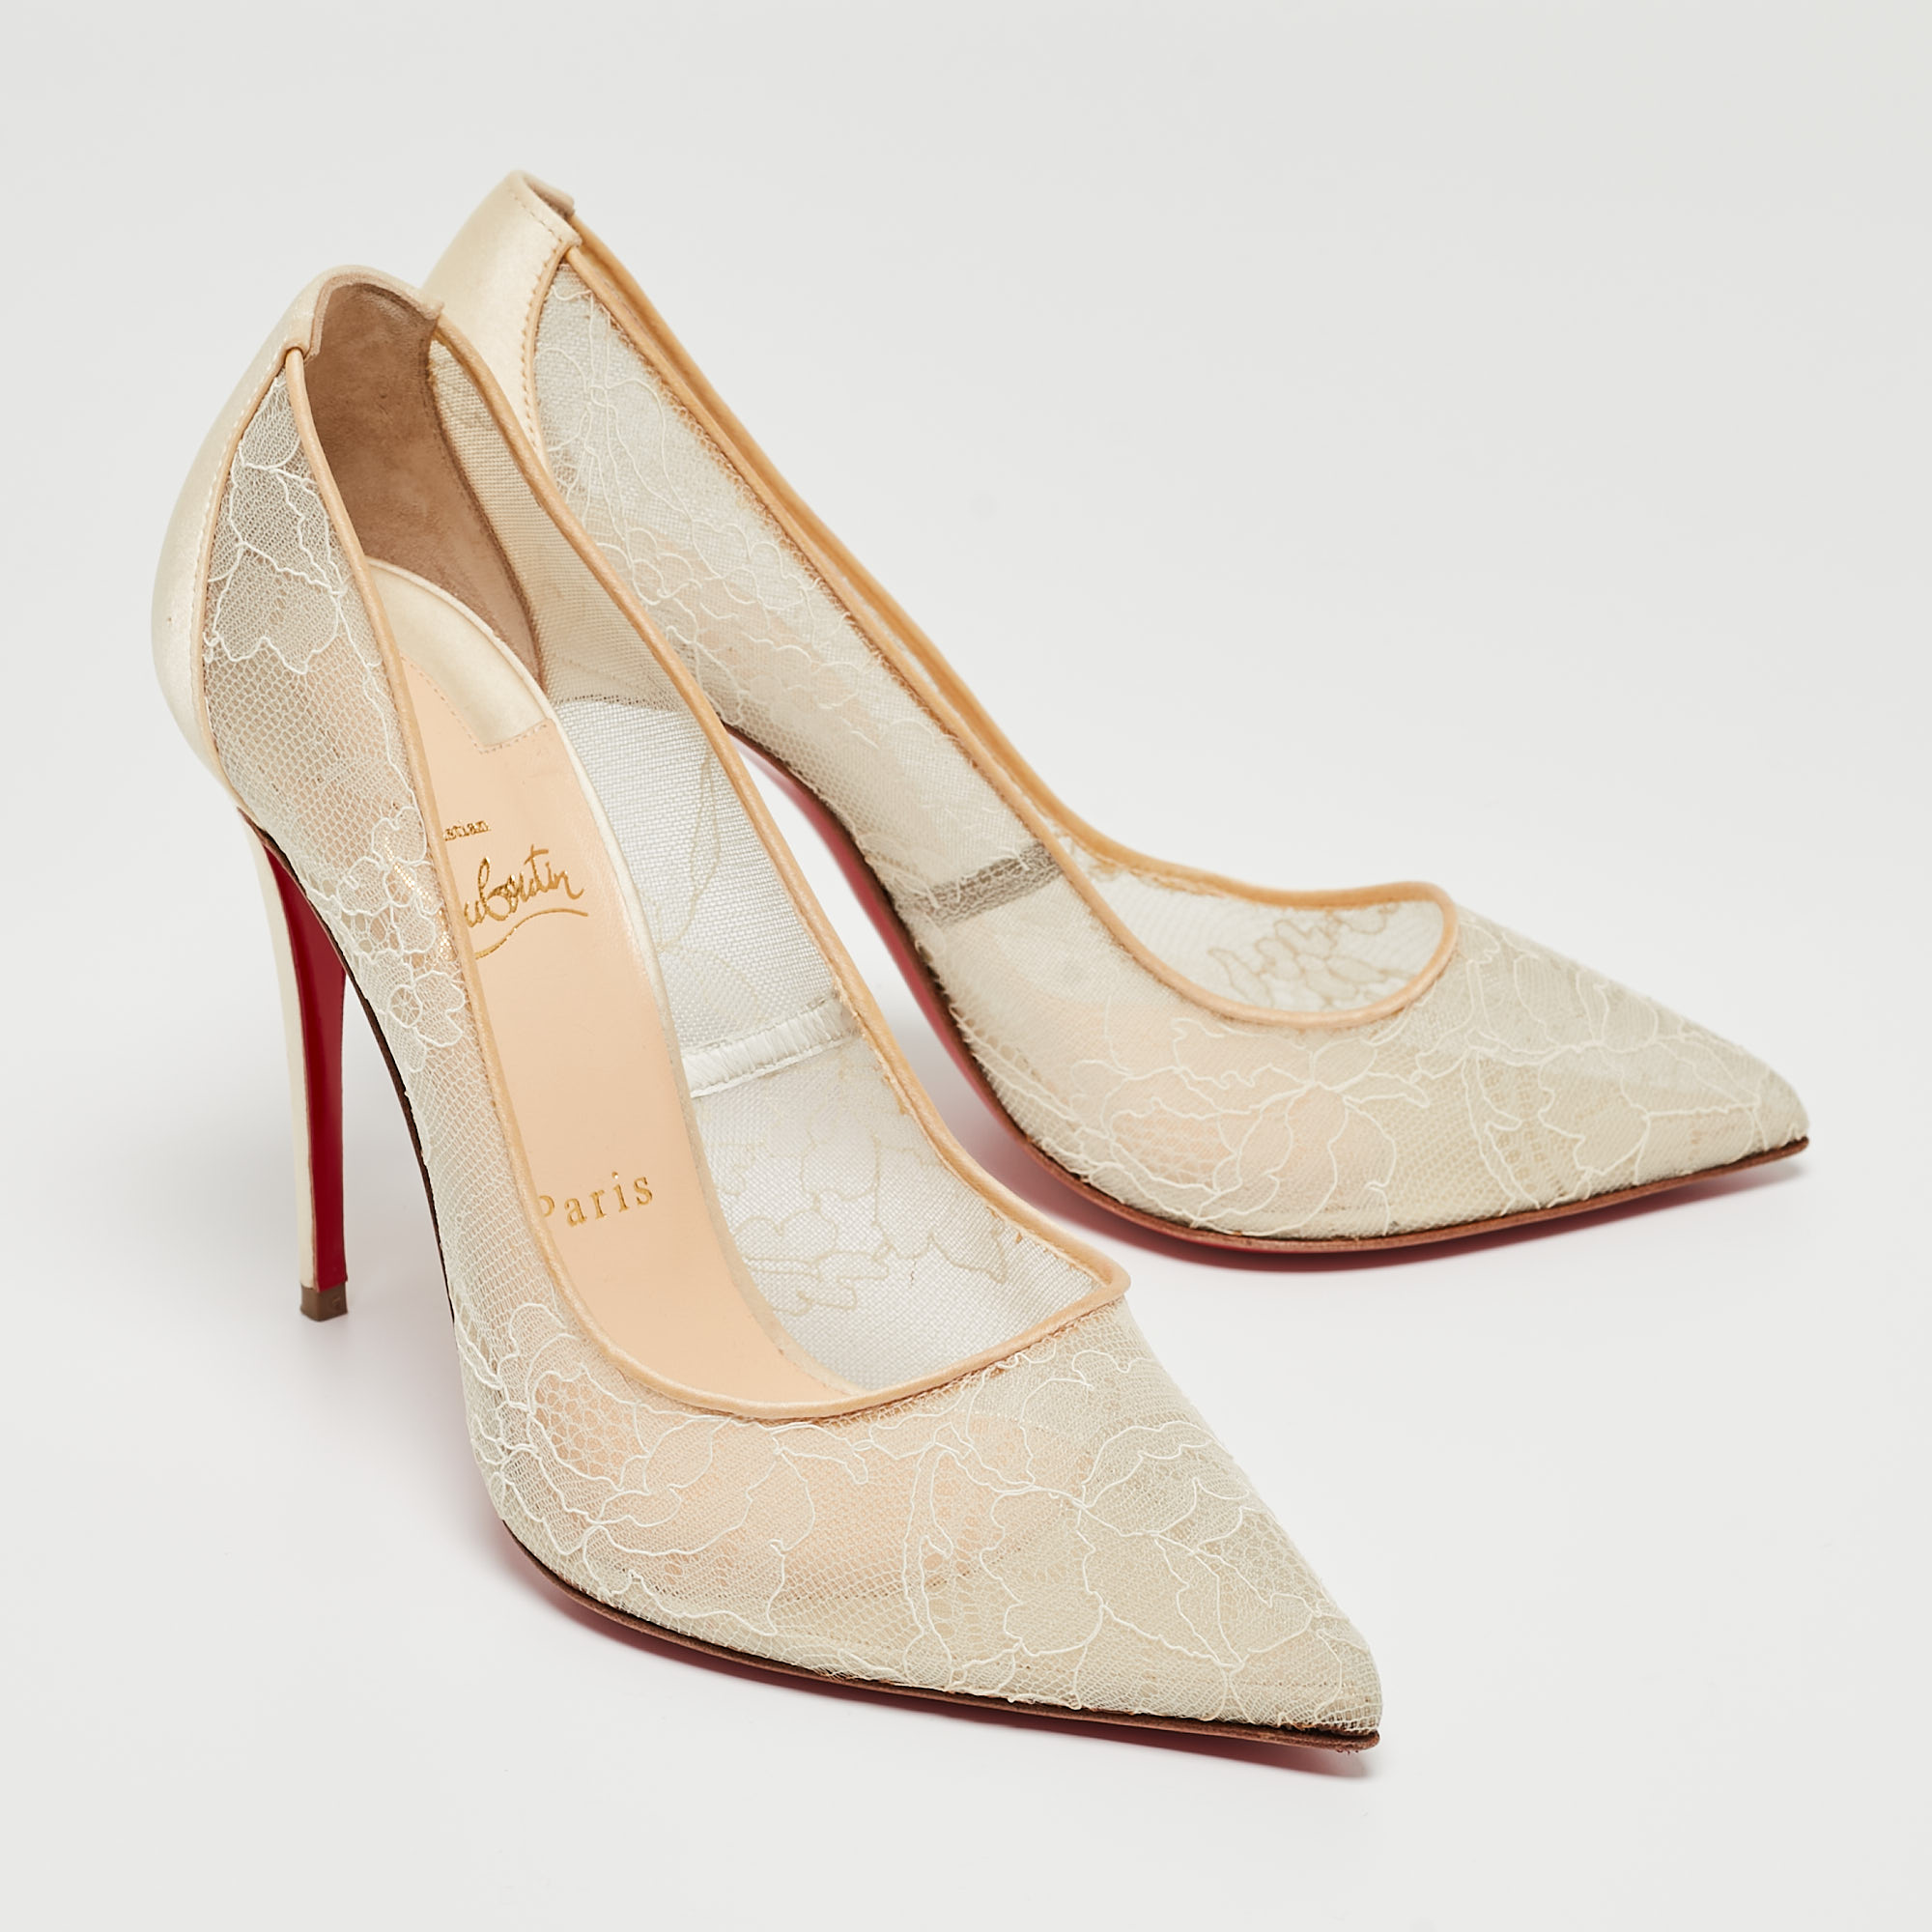 Christian Louboutin Off White Satin And Lace Follies Pumps Size 38.5